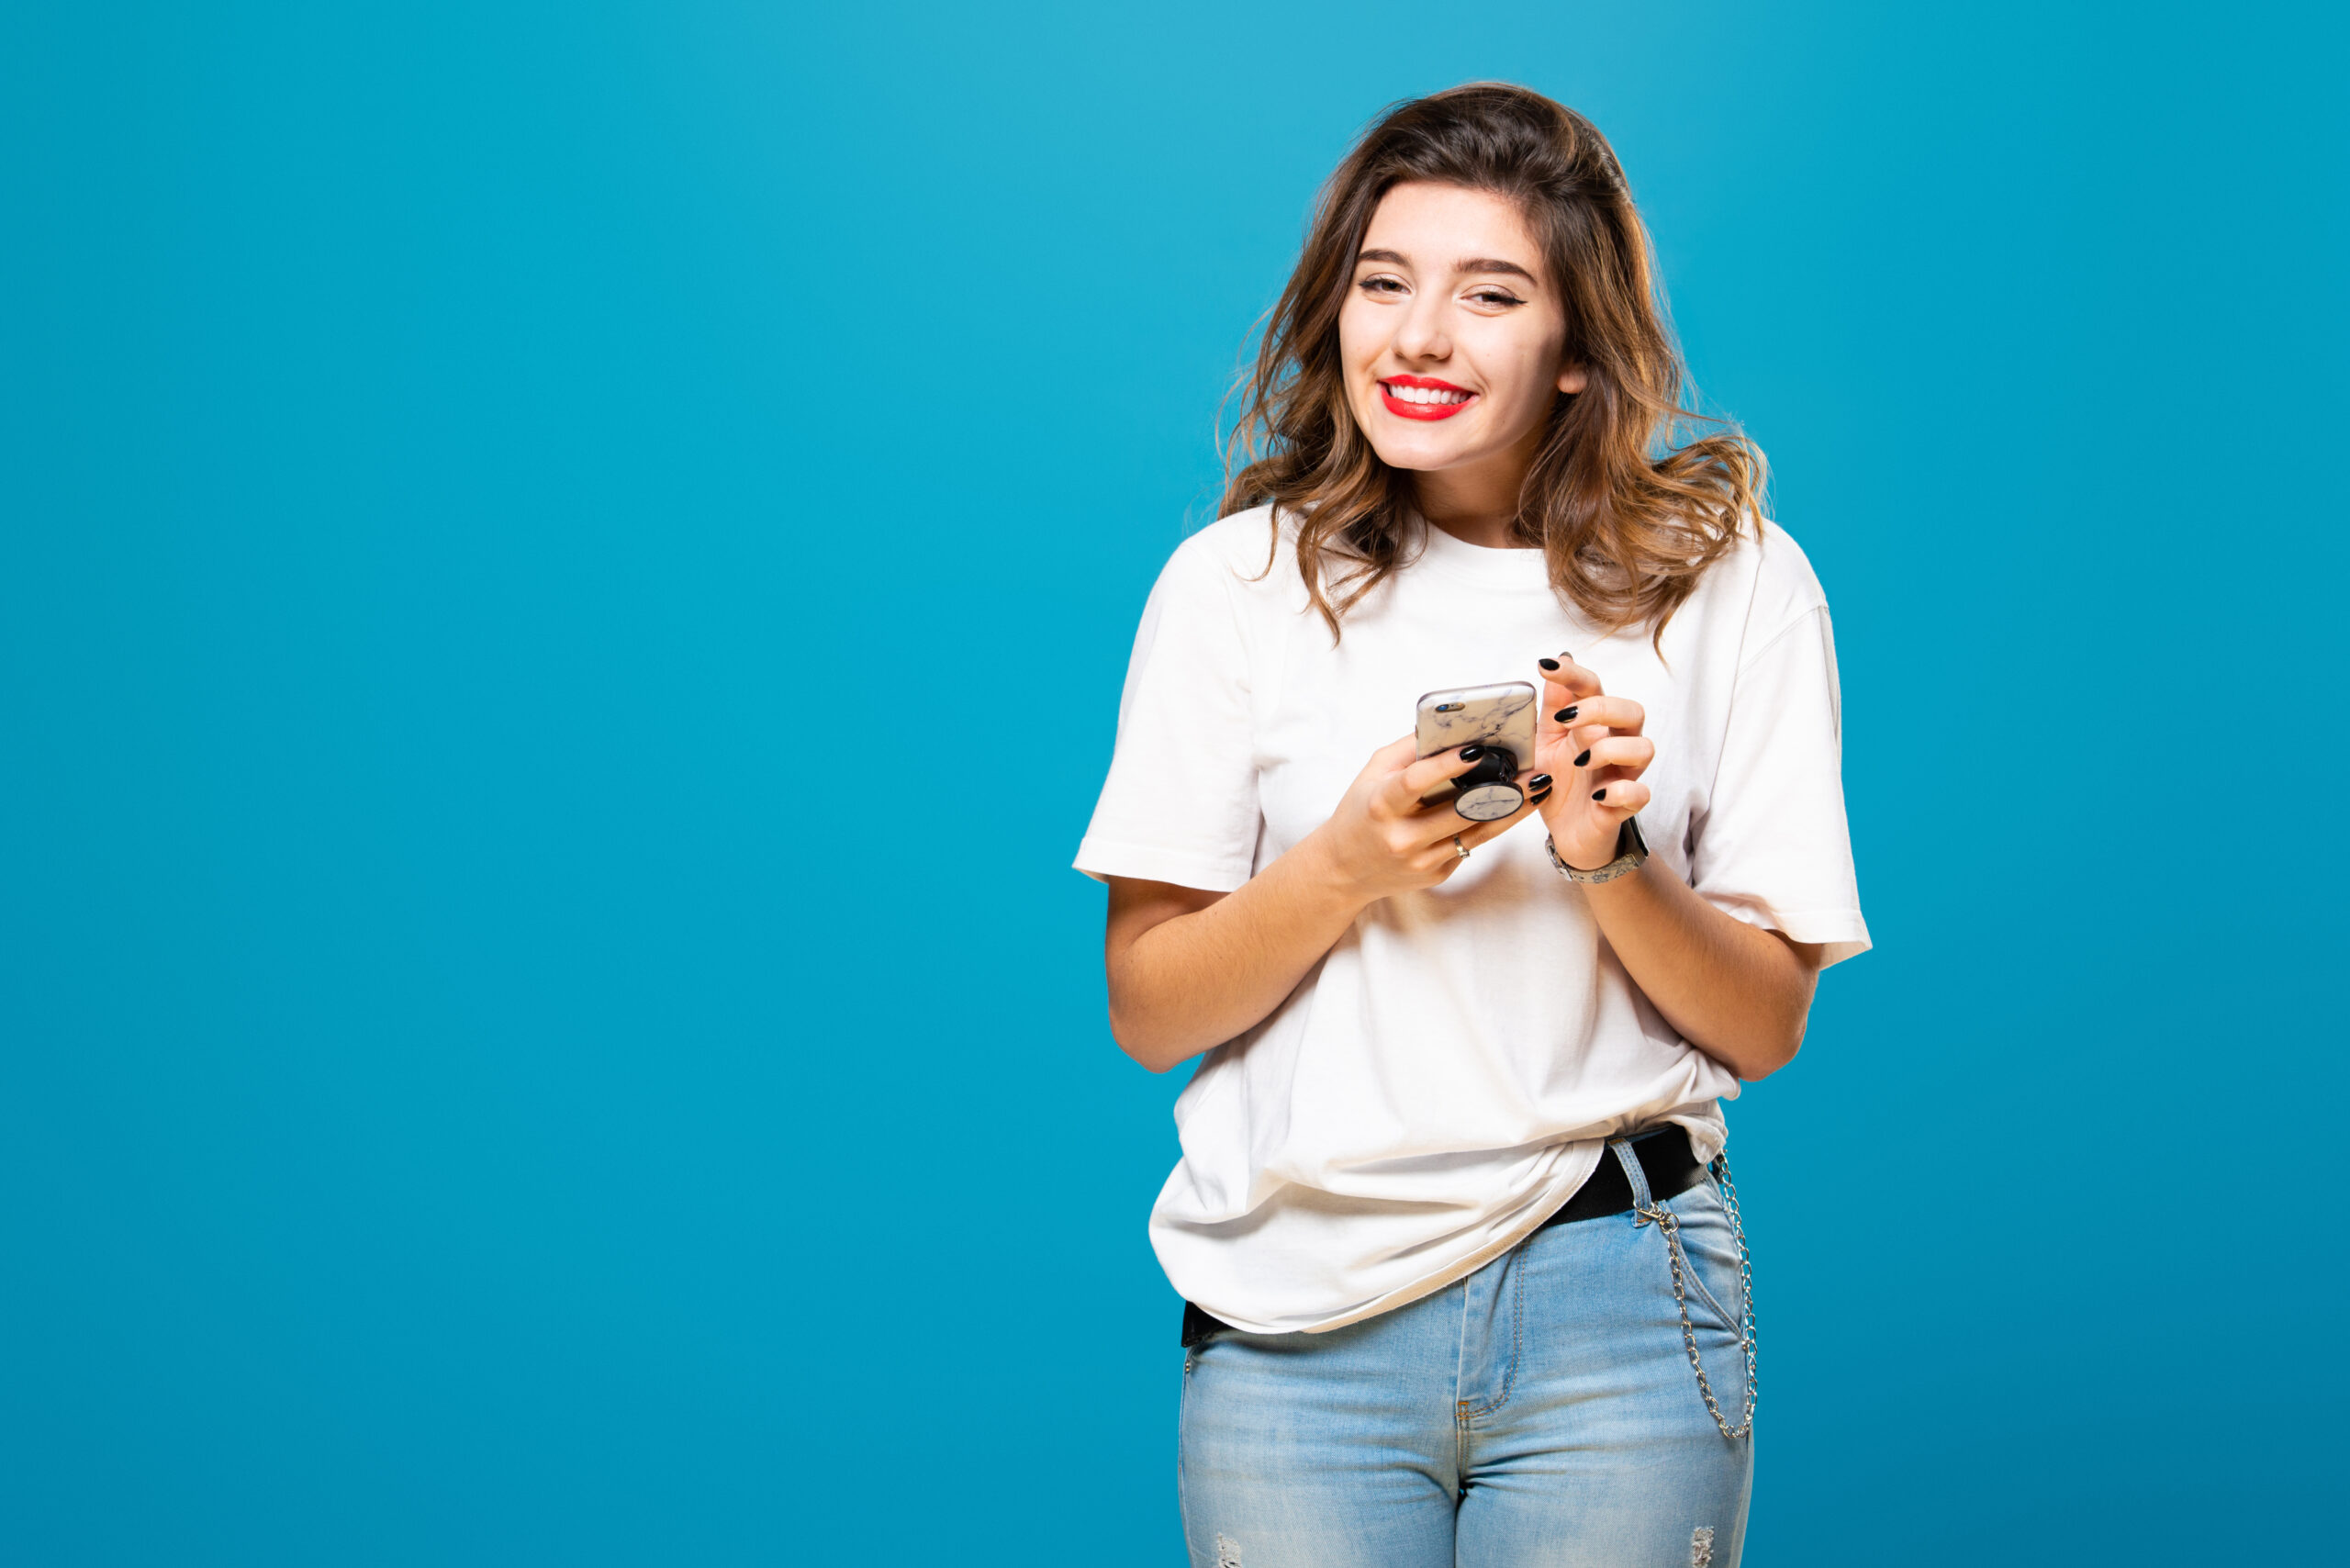 Girl,With,A,Phone,In,Her,Hands,Smiles,,Isolated,On